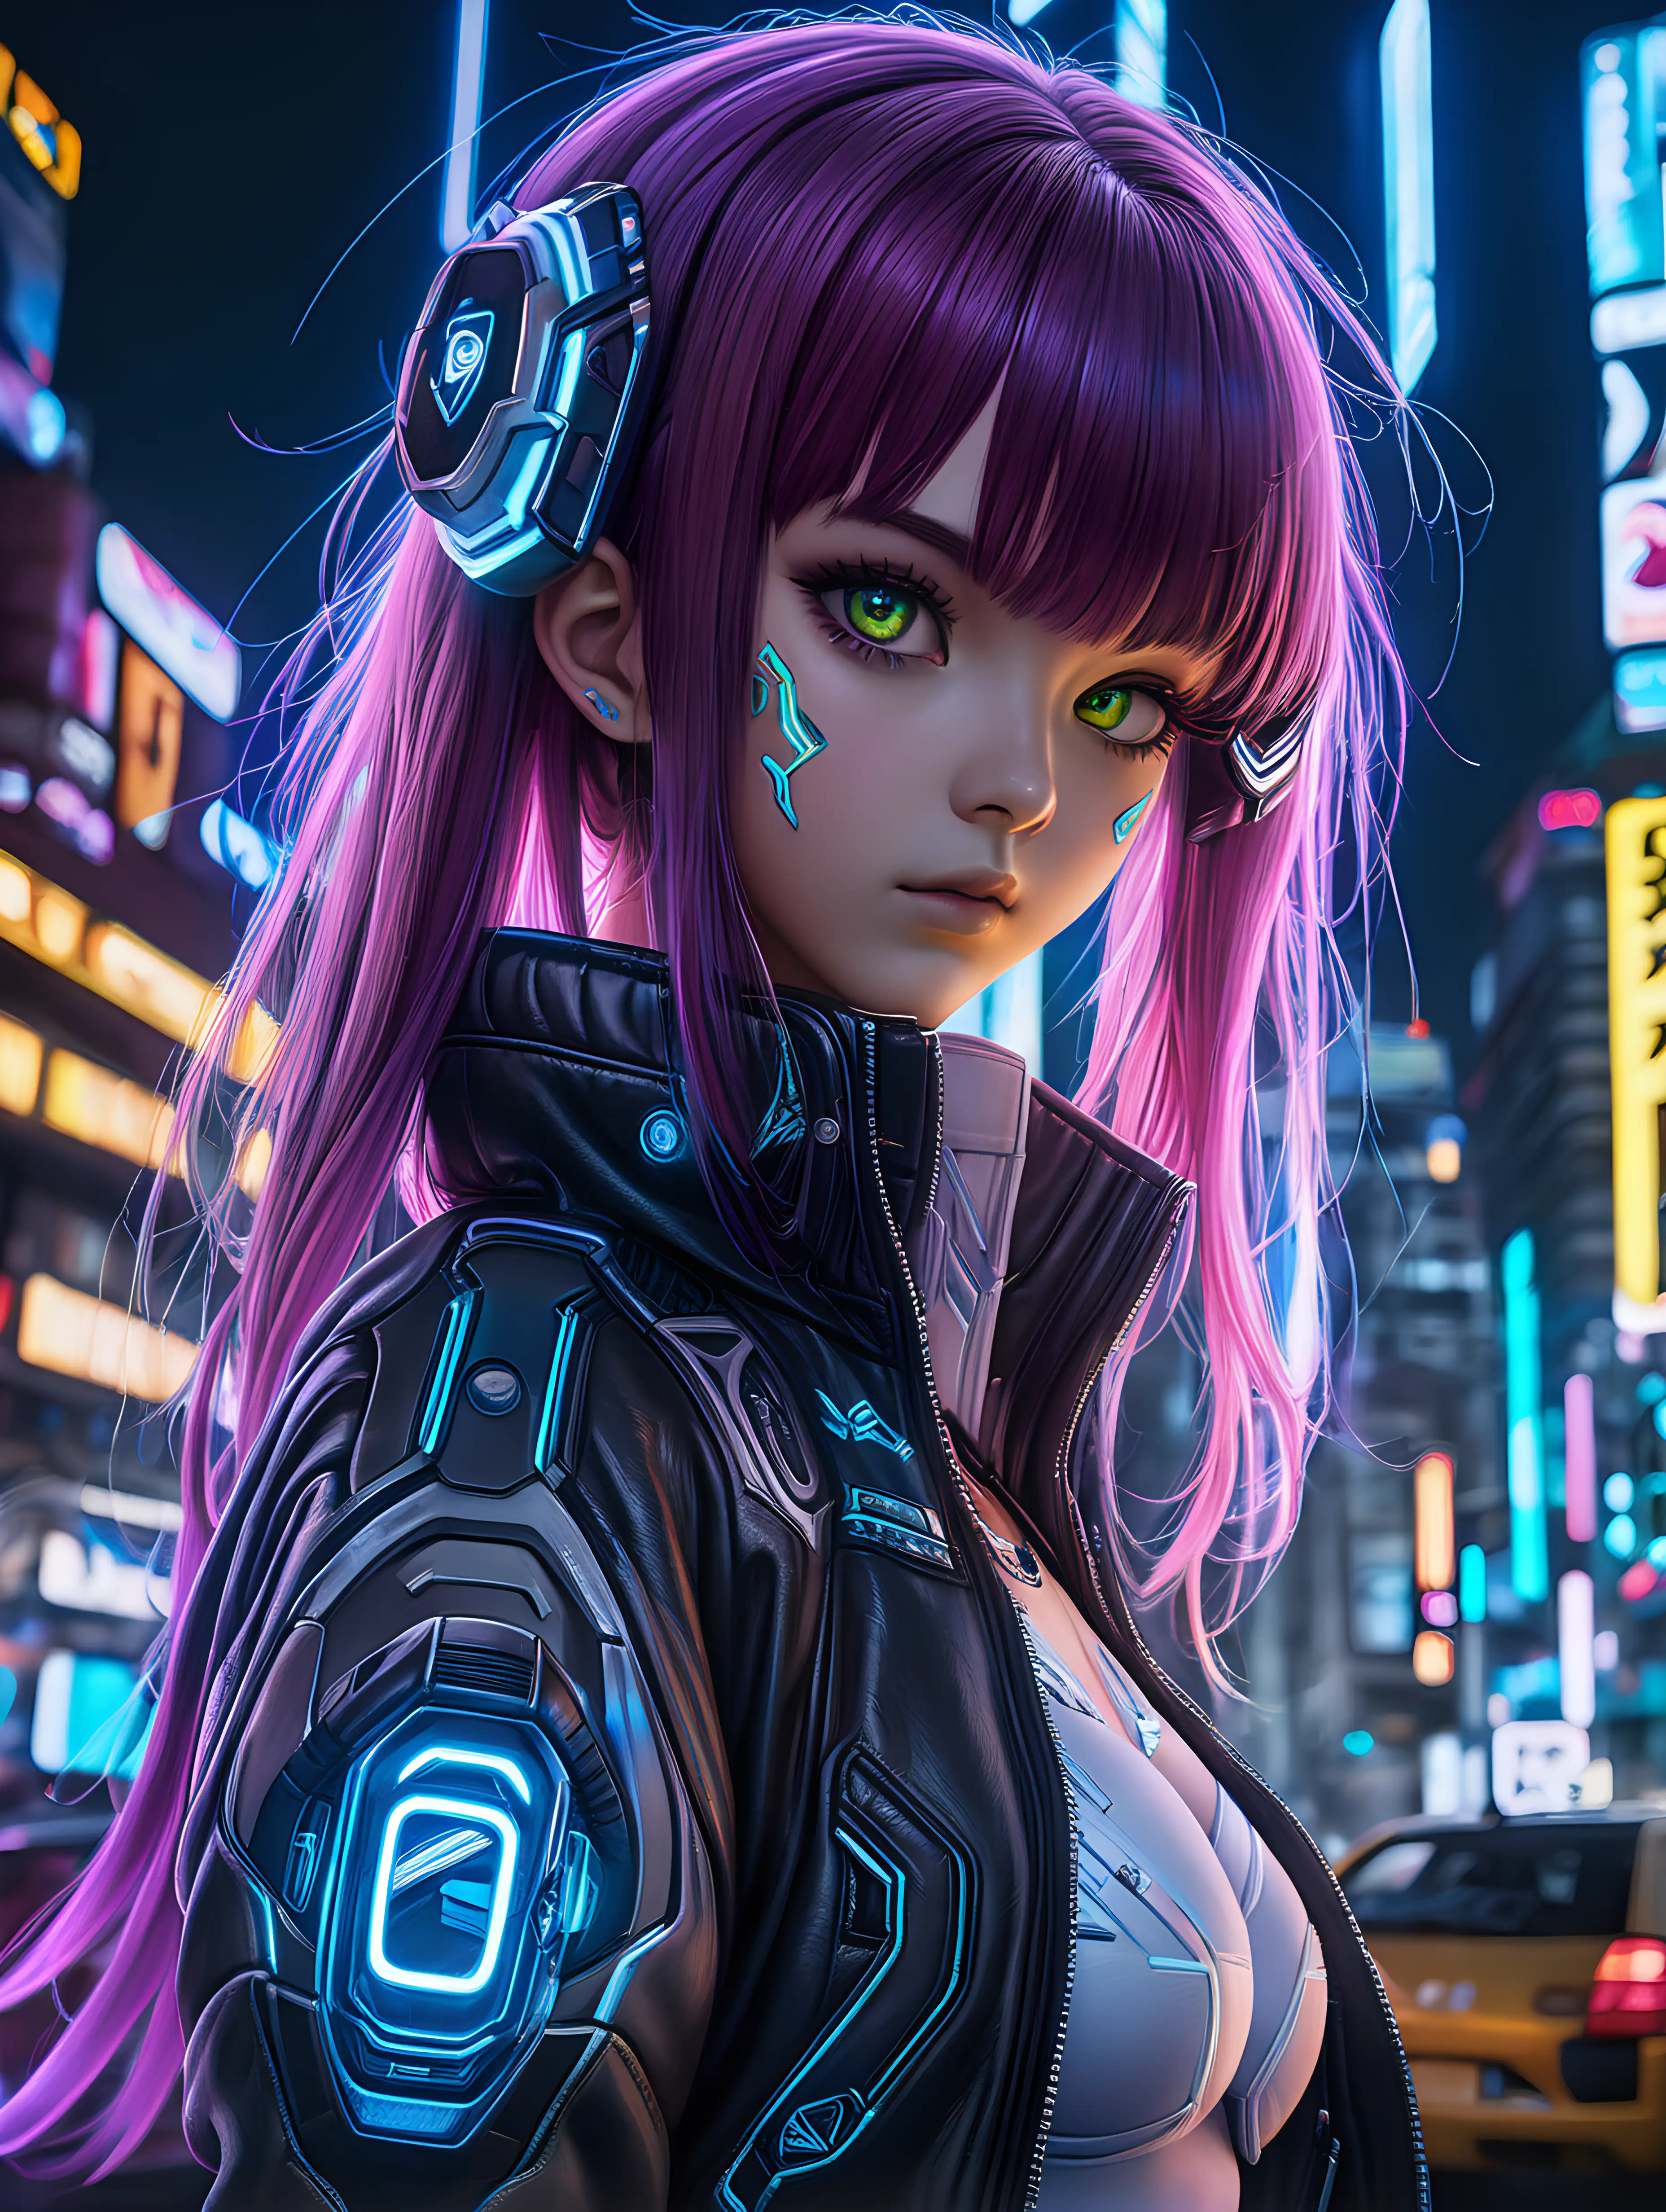 Cyberpunk Anime Girl Poster Cute and Neon, Perfect for Anime and Cyberpunk  Enthusiasts - Etsy